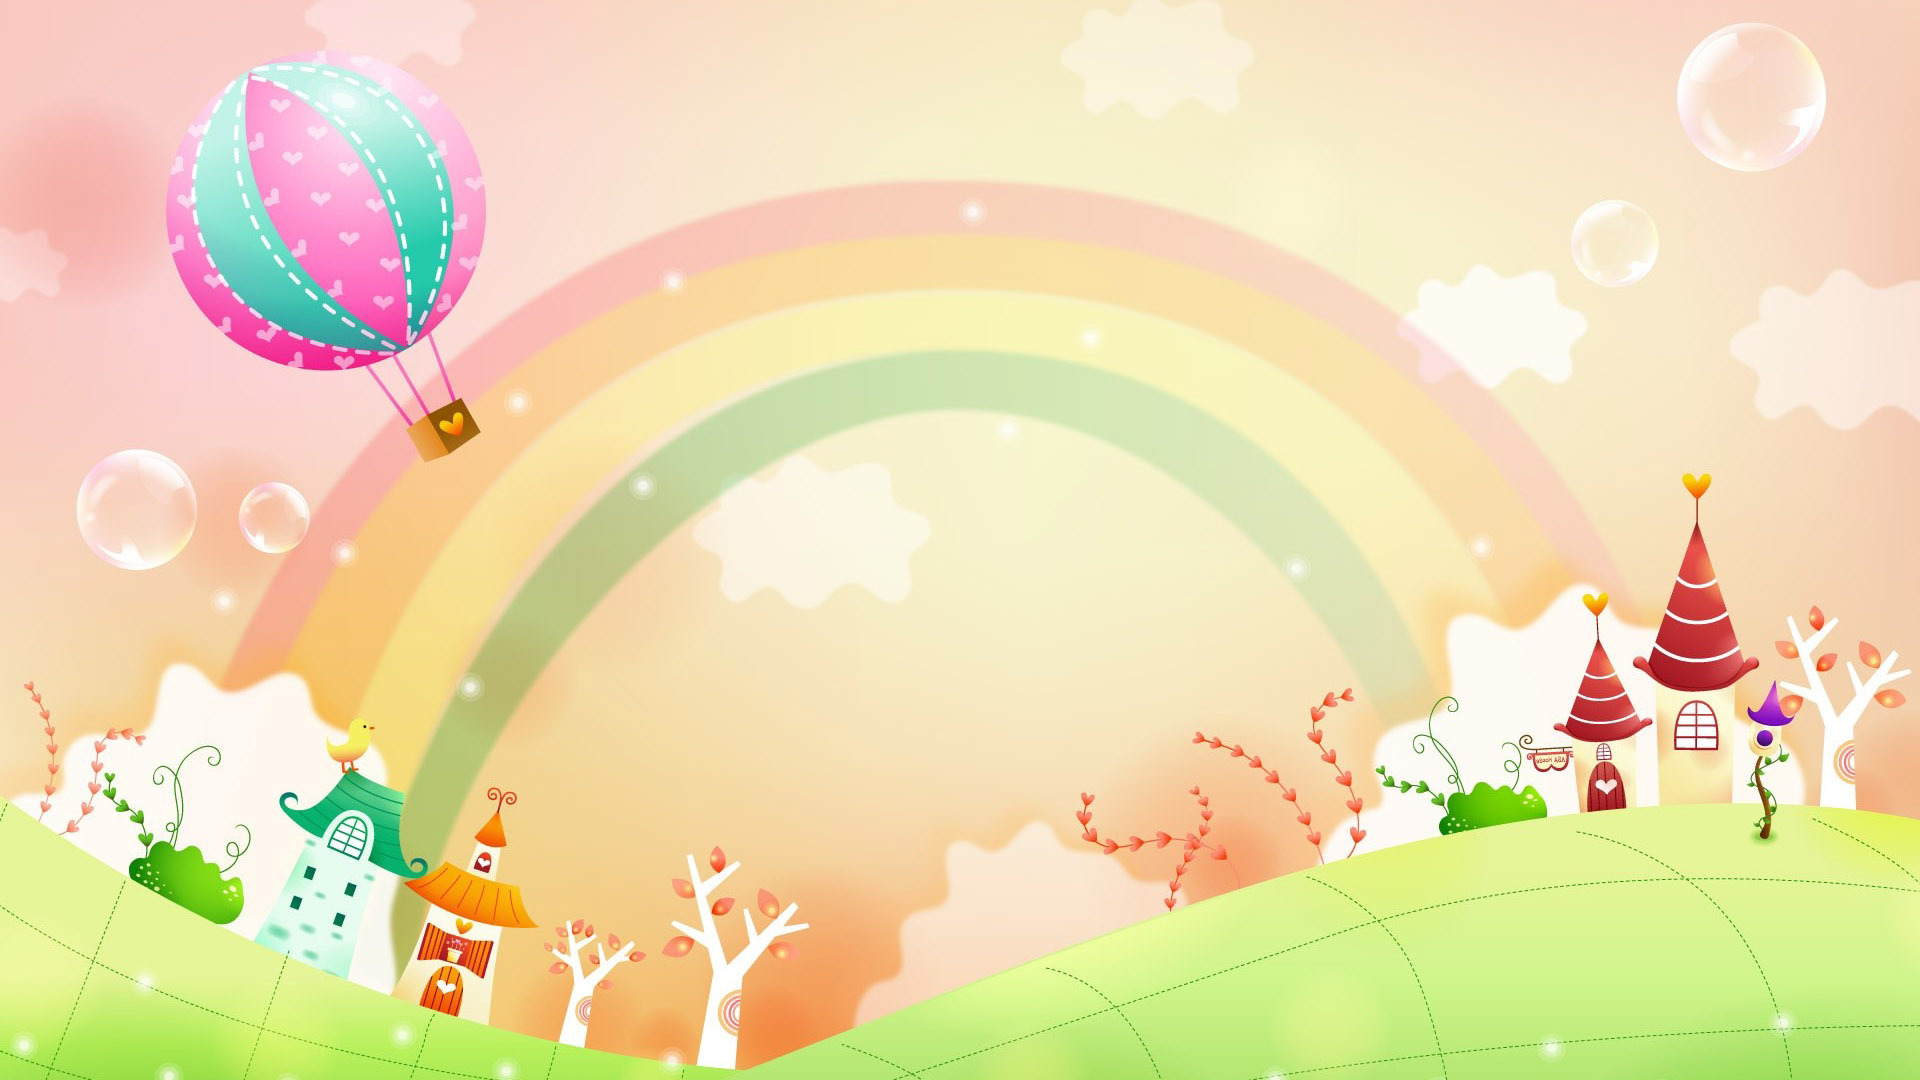 Rainbow Wallpapers Wallpaper High Definition High Quality